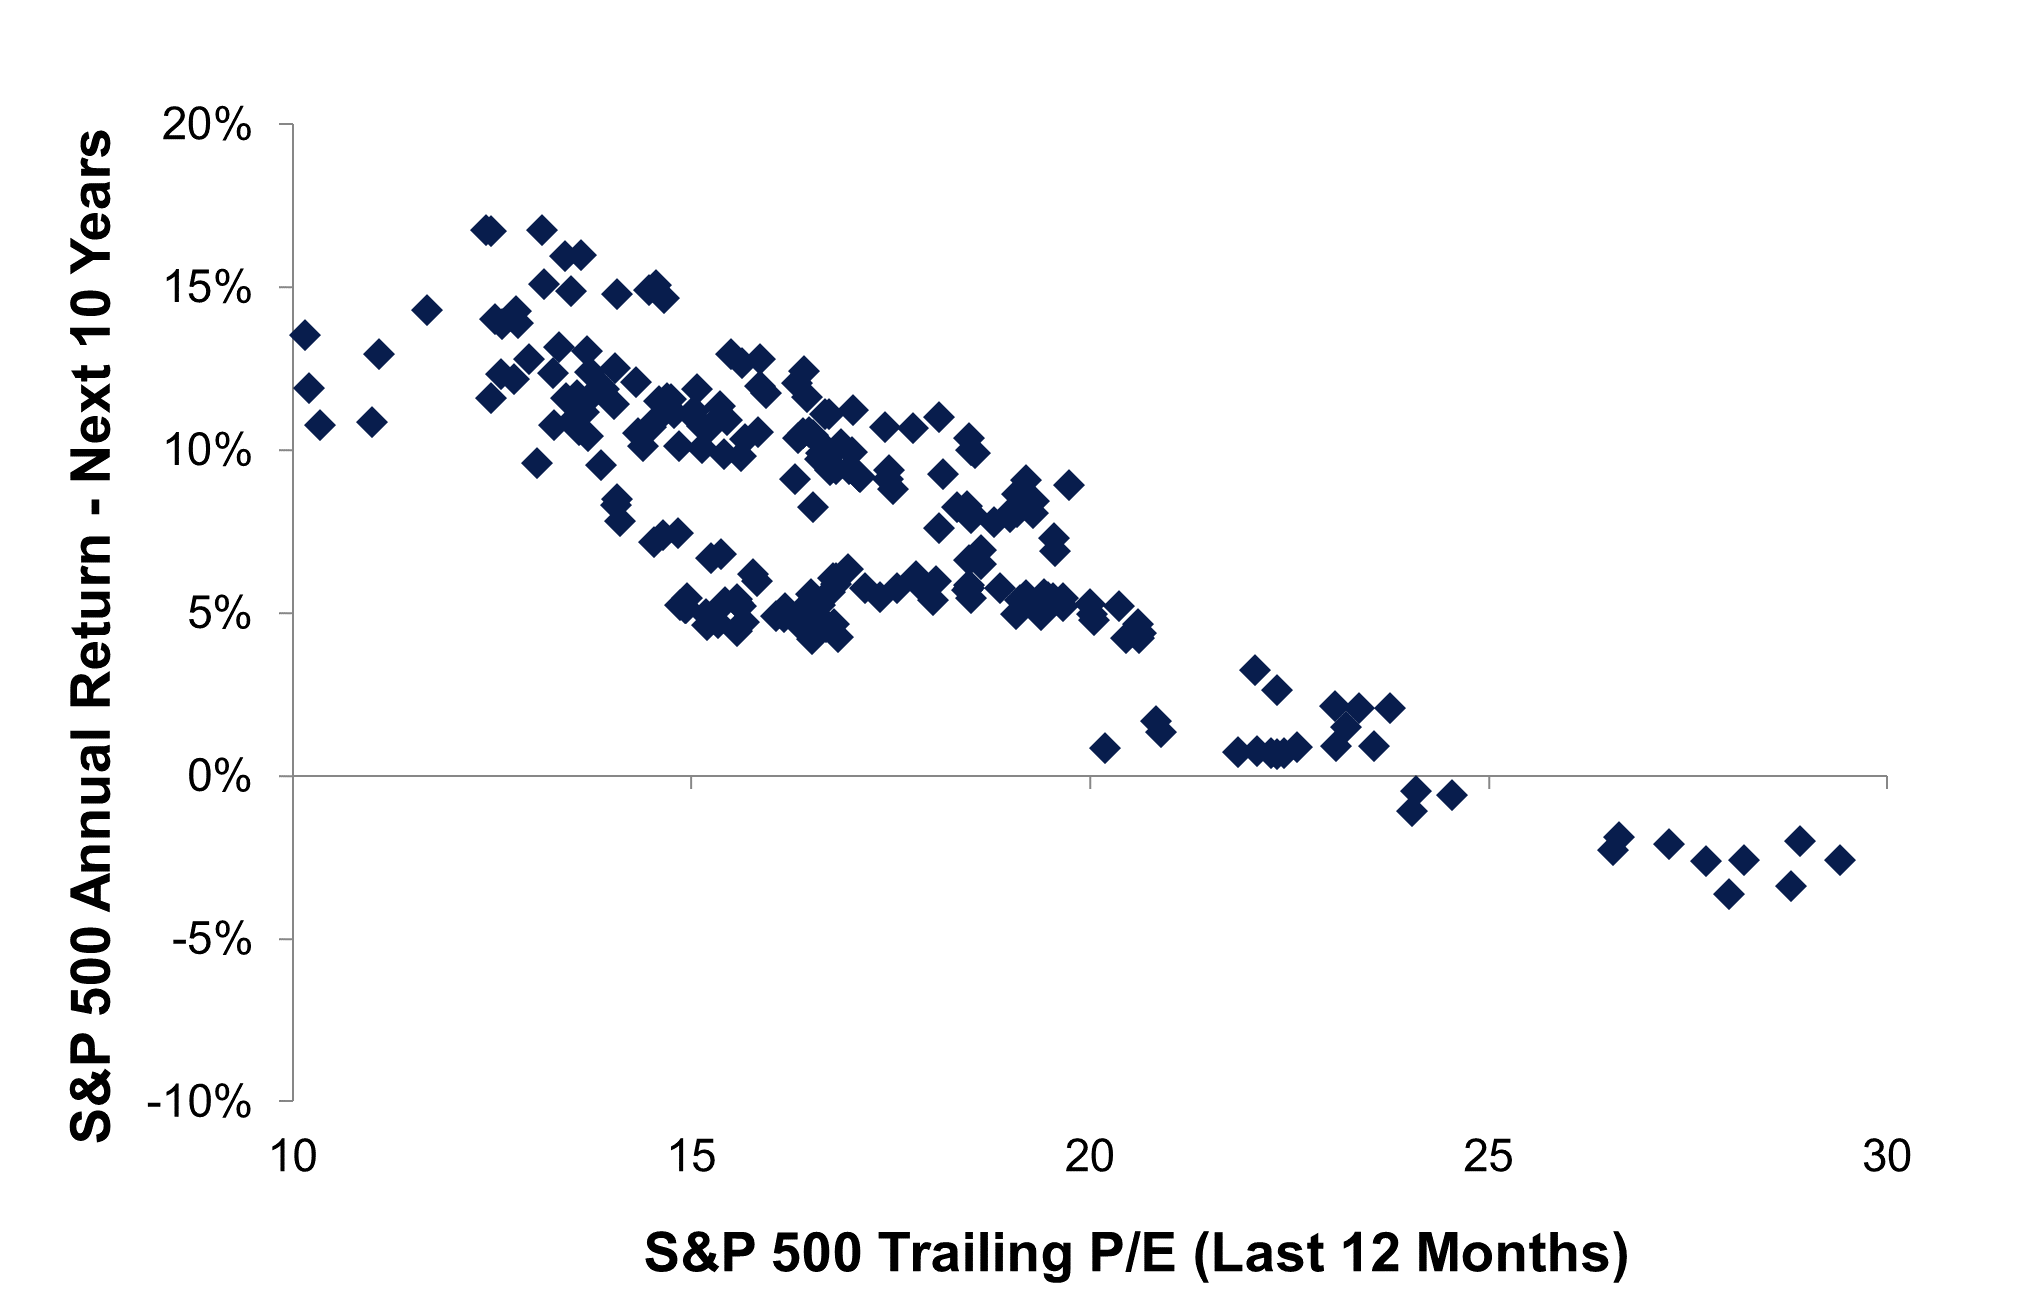 Dot plot depicting the S&P 500 Index P/E on the horizontal (x) axis and subsequent 10-year return on the vertical (y) axis as described in preceding paragraph.